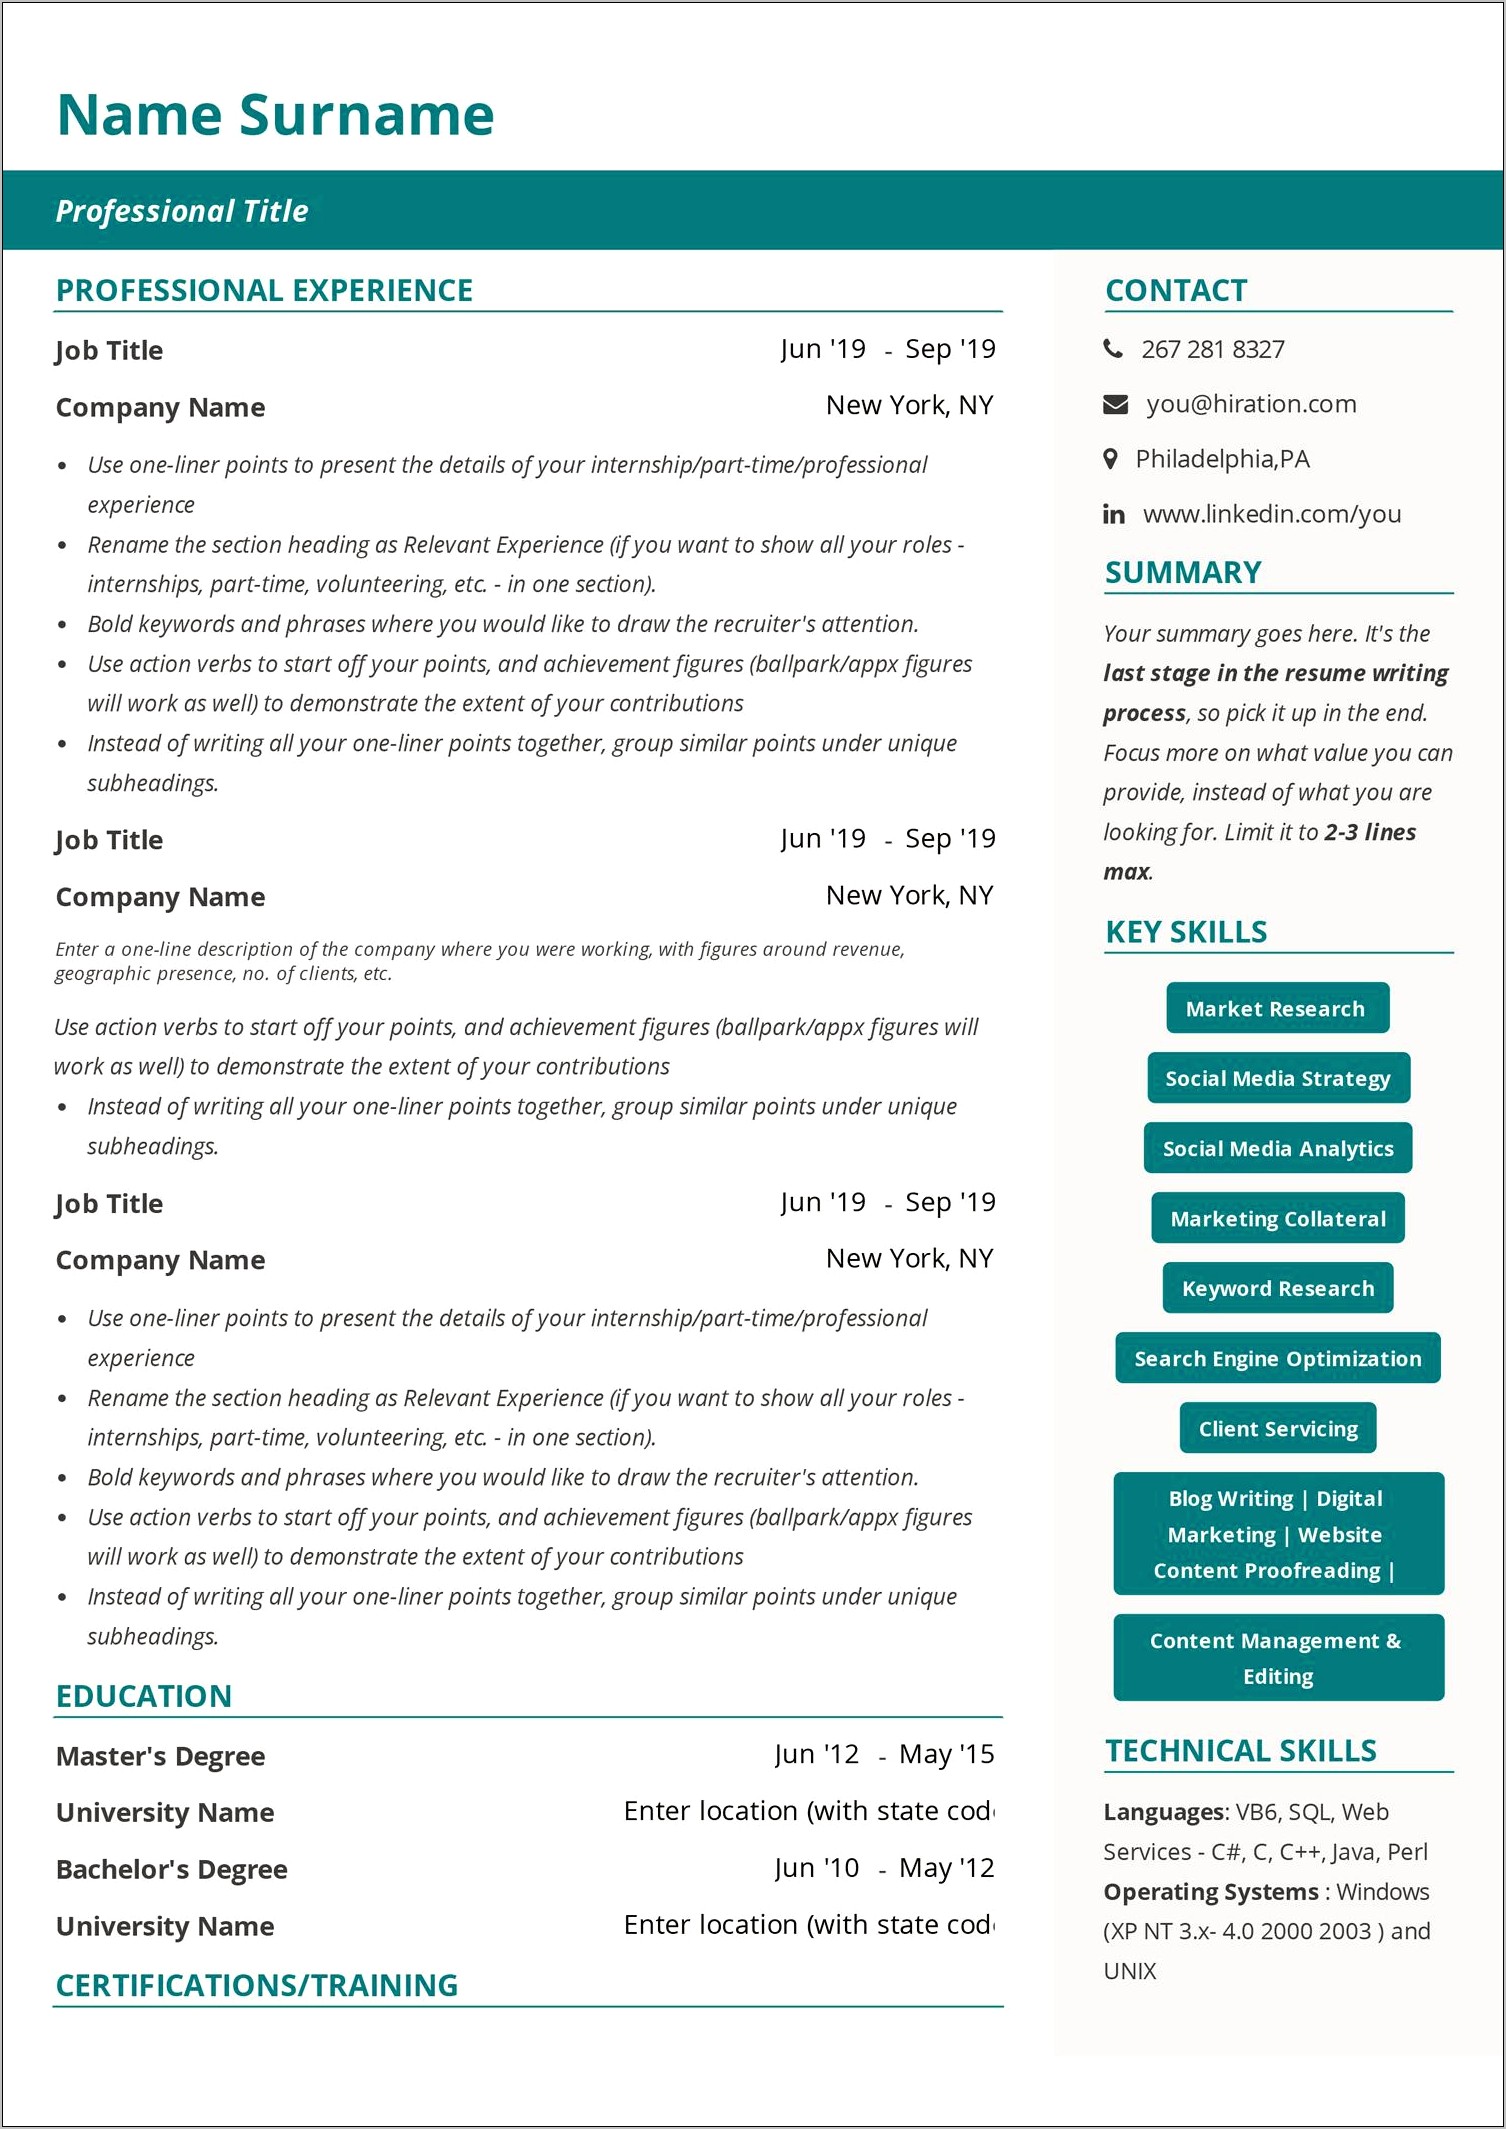 Resume Worded Free Resume Review